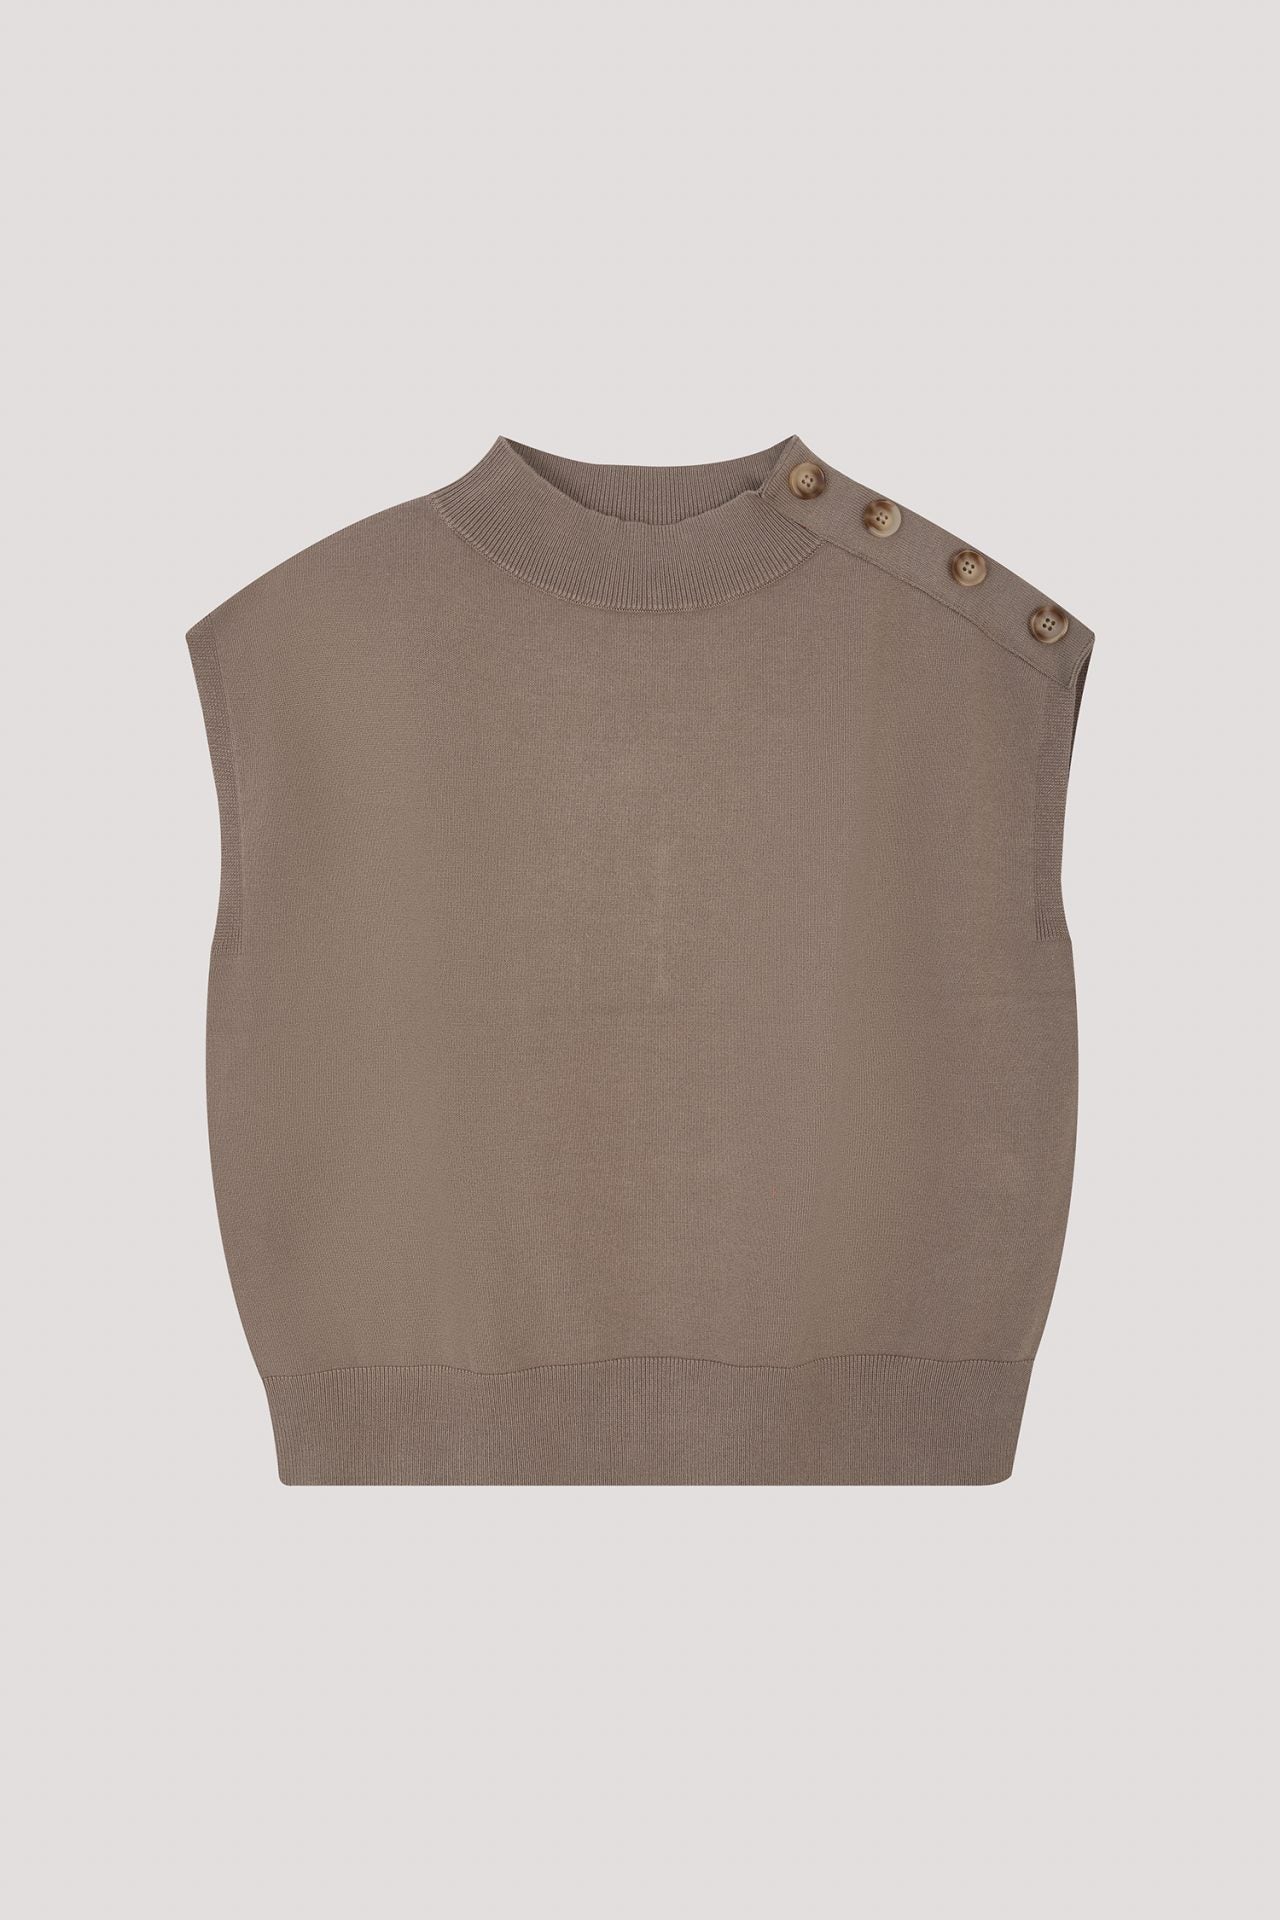 Contrast Ribbed Knit Top - Beige - Pomelo Fashion